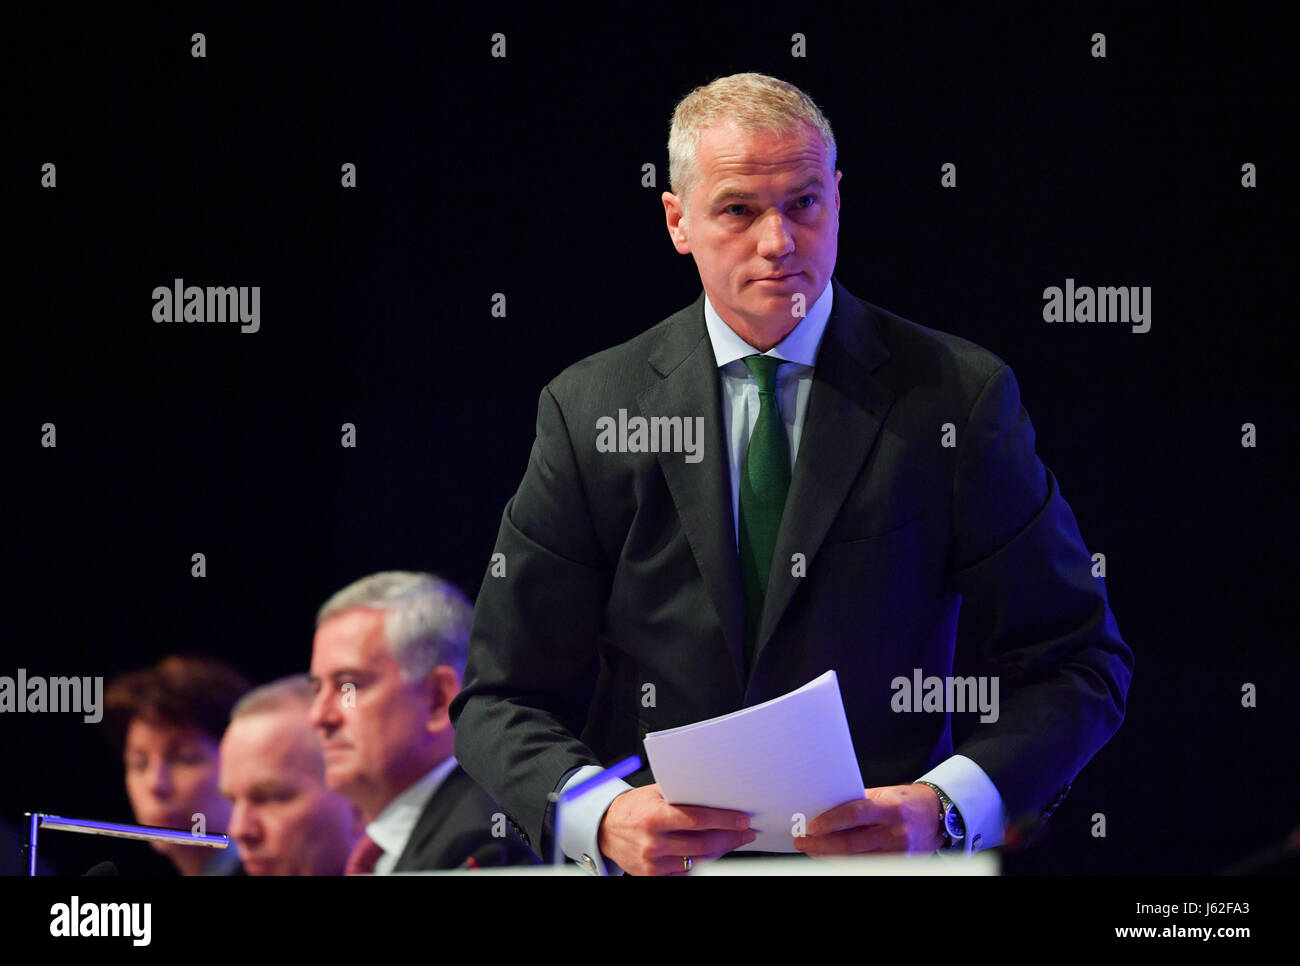 Carsten Kengeter (r), chairman of the Deutsche Boerse AG (lit. 'German stockmarket'), stands up next to board members Hauke Stars (l-r), Andreas Preuss and Gregor Pottmeyer during the general assembly of the company at the 'Jahrhunderthalle' in Frankfurt/Main, Germany, 17 May 2017. Photo: Arne Dedert/dpa Stock Photo